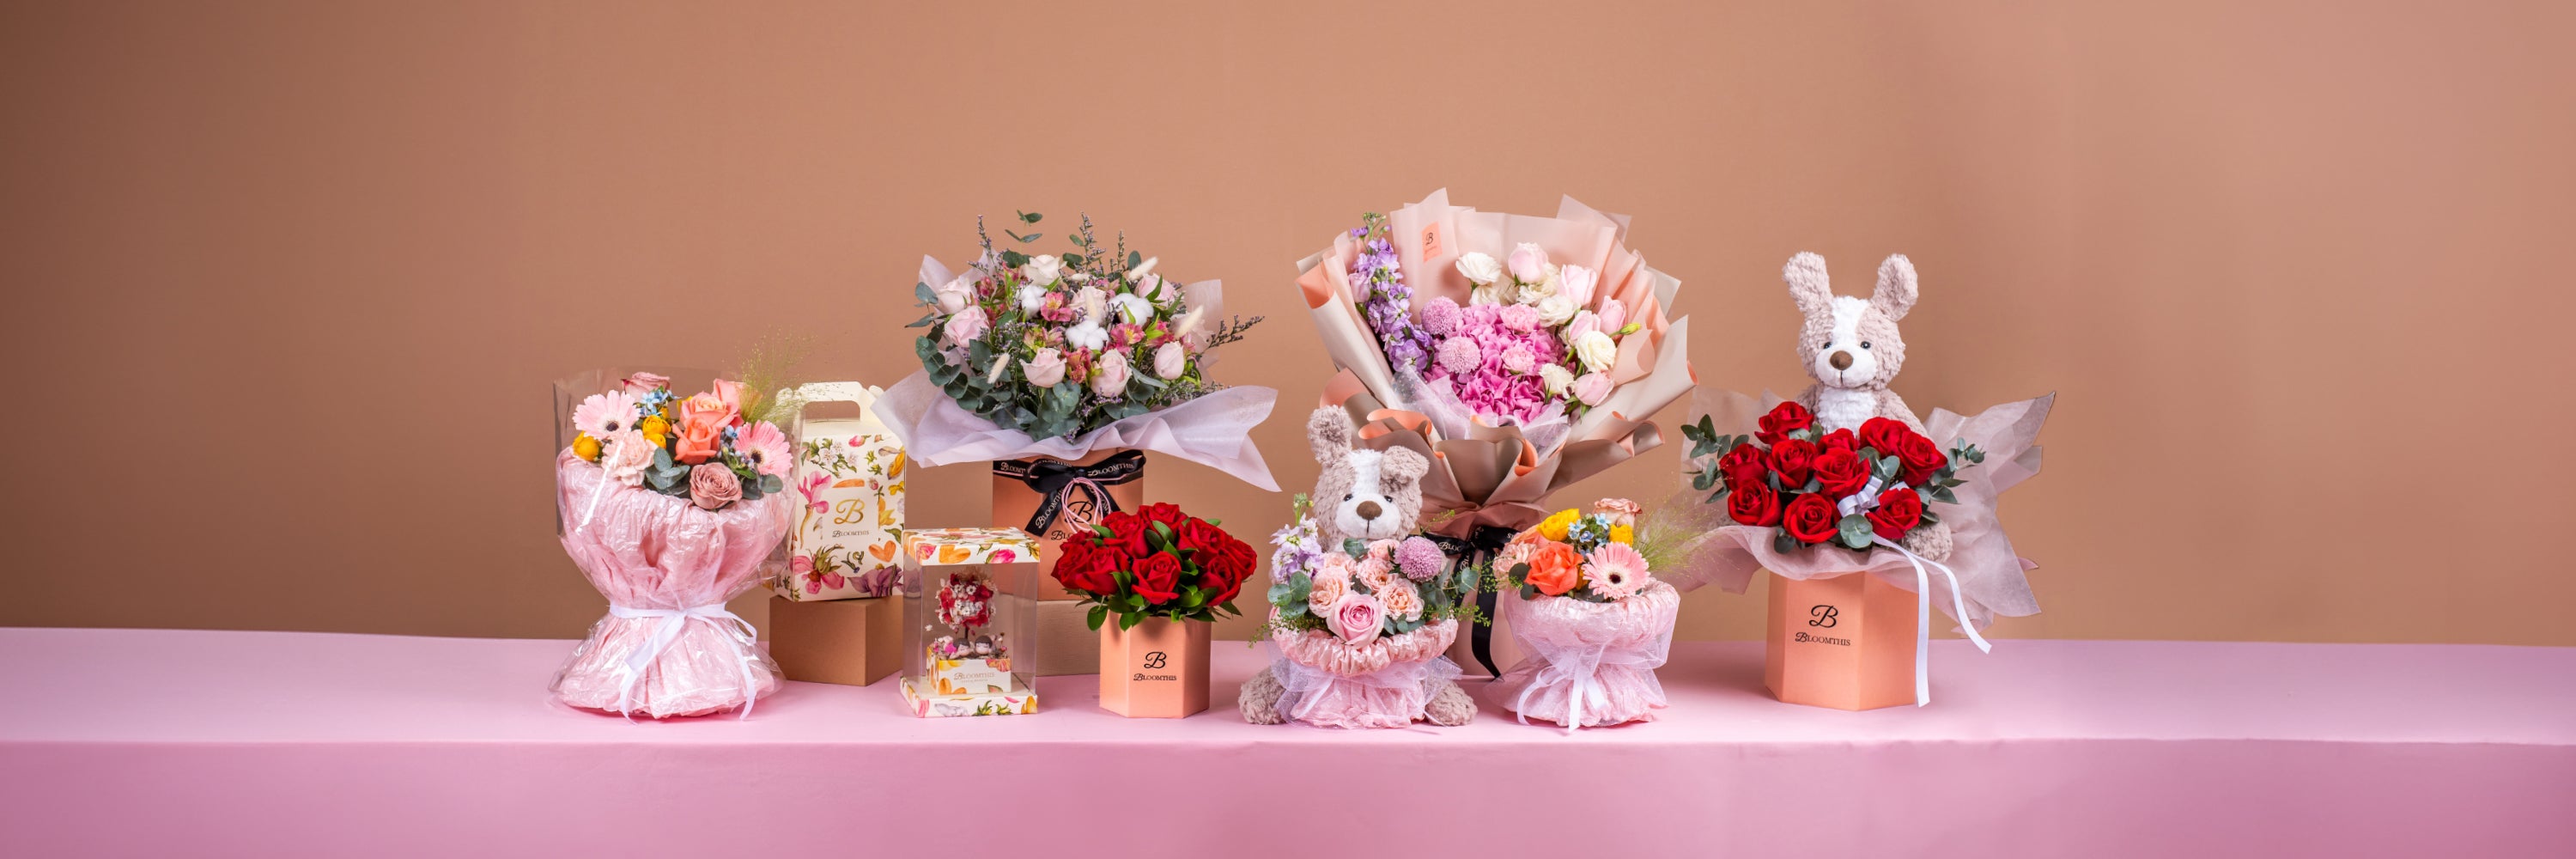 Valentine's Day flowers & gifts by BloomThis